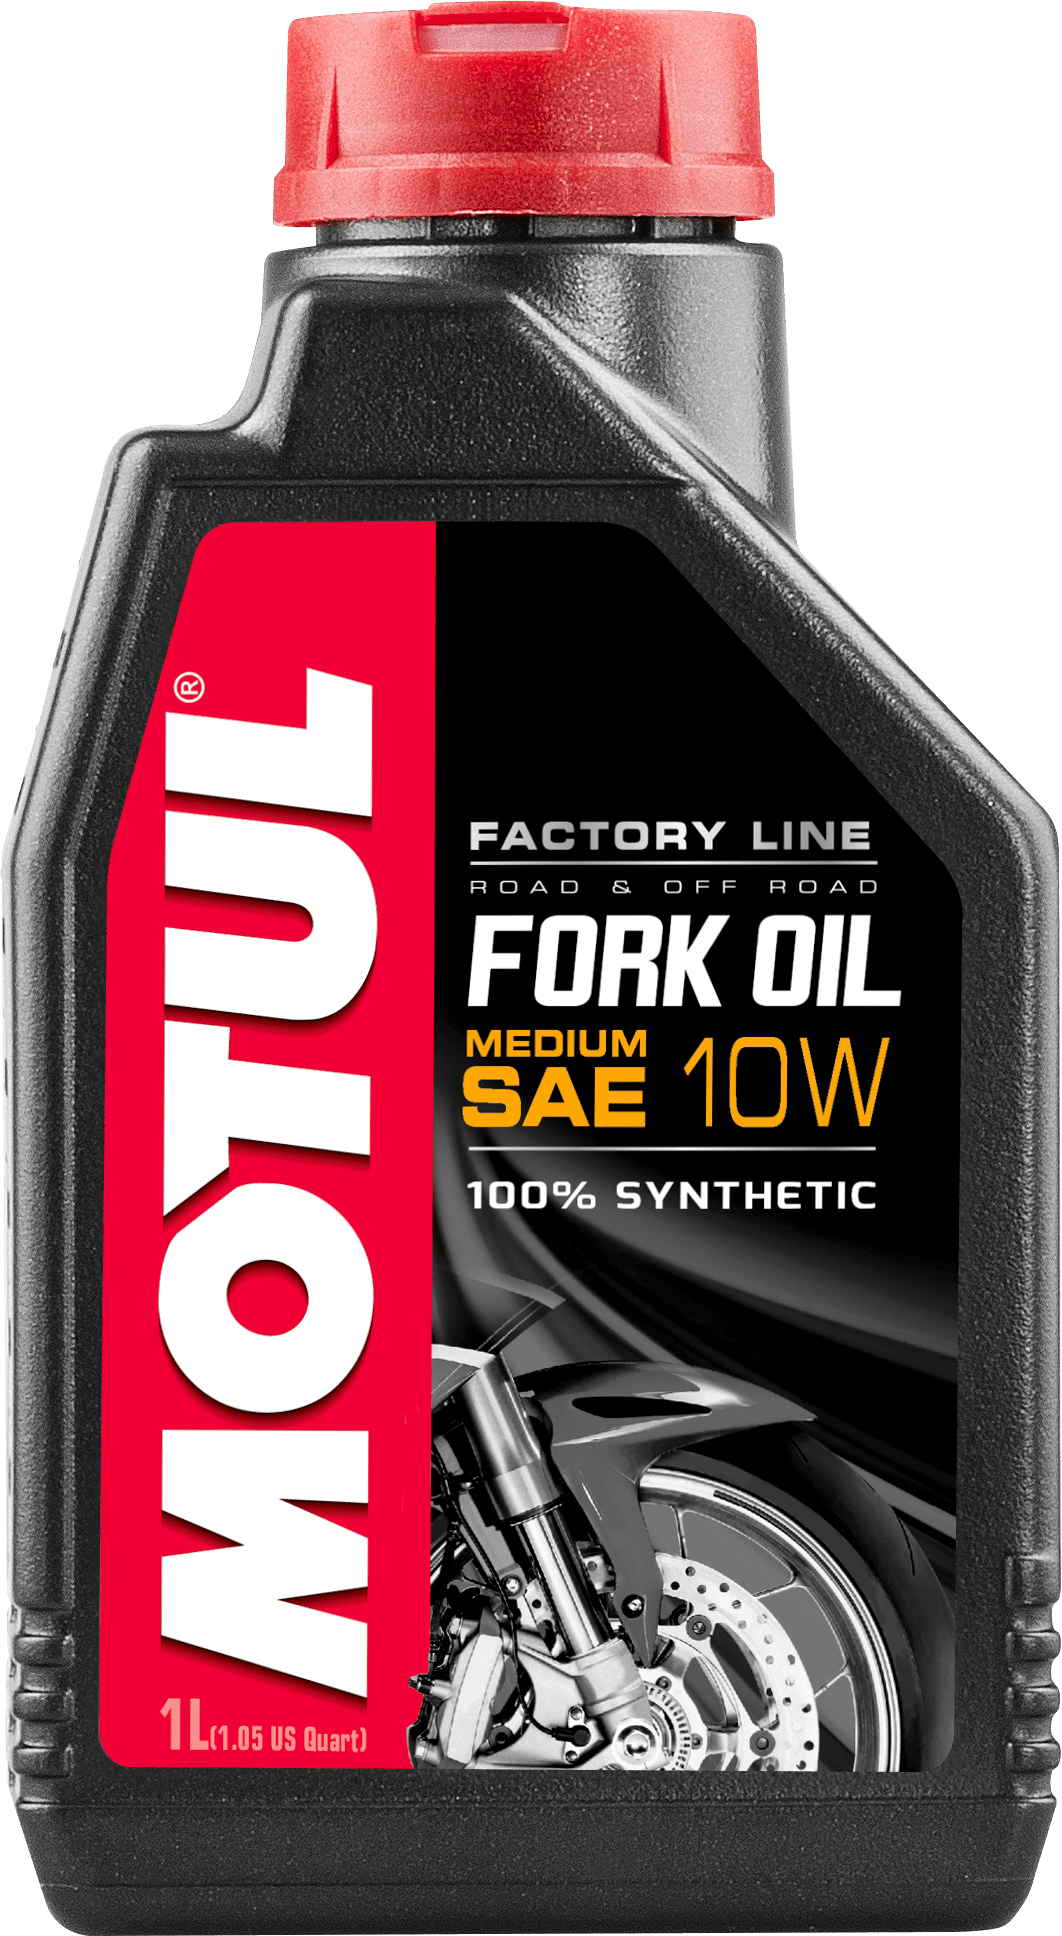 105925-1 100% synthetic high performance hydraulic fluid for racing telescopic Forks.